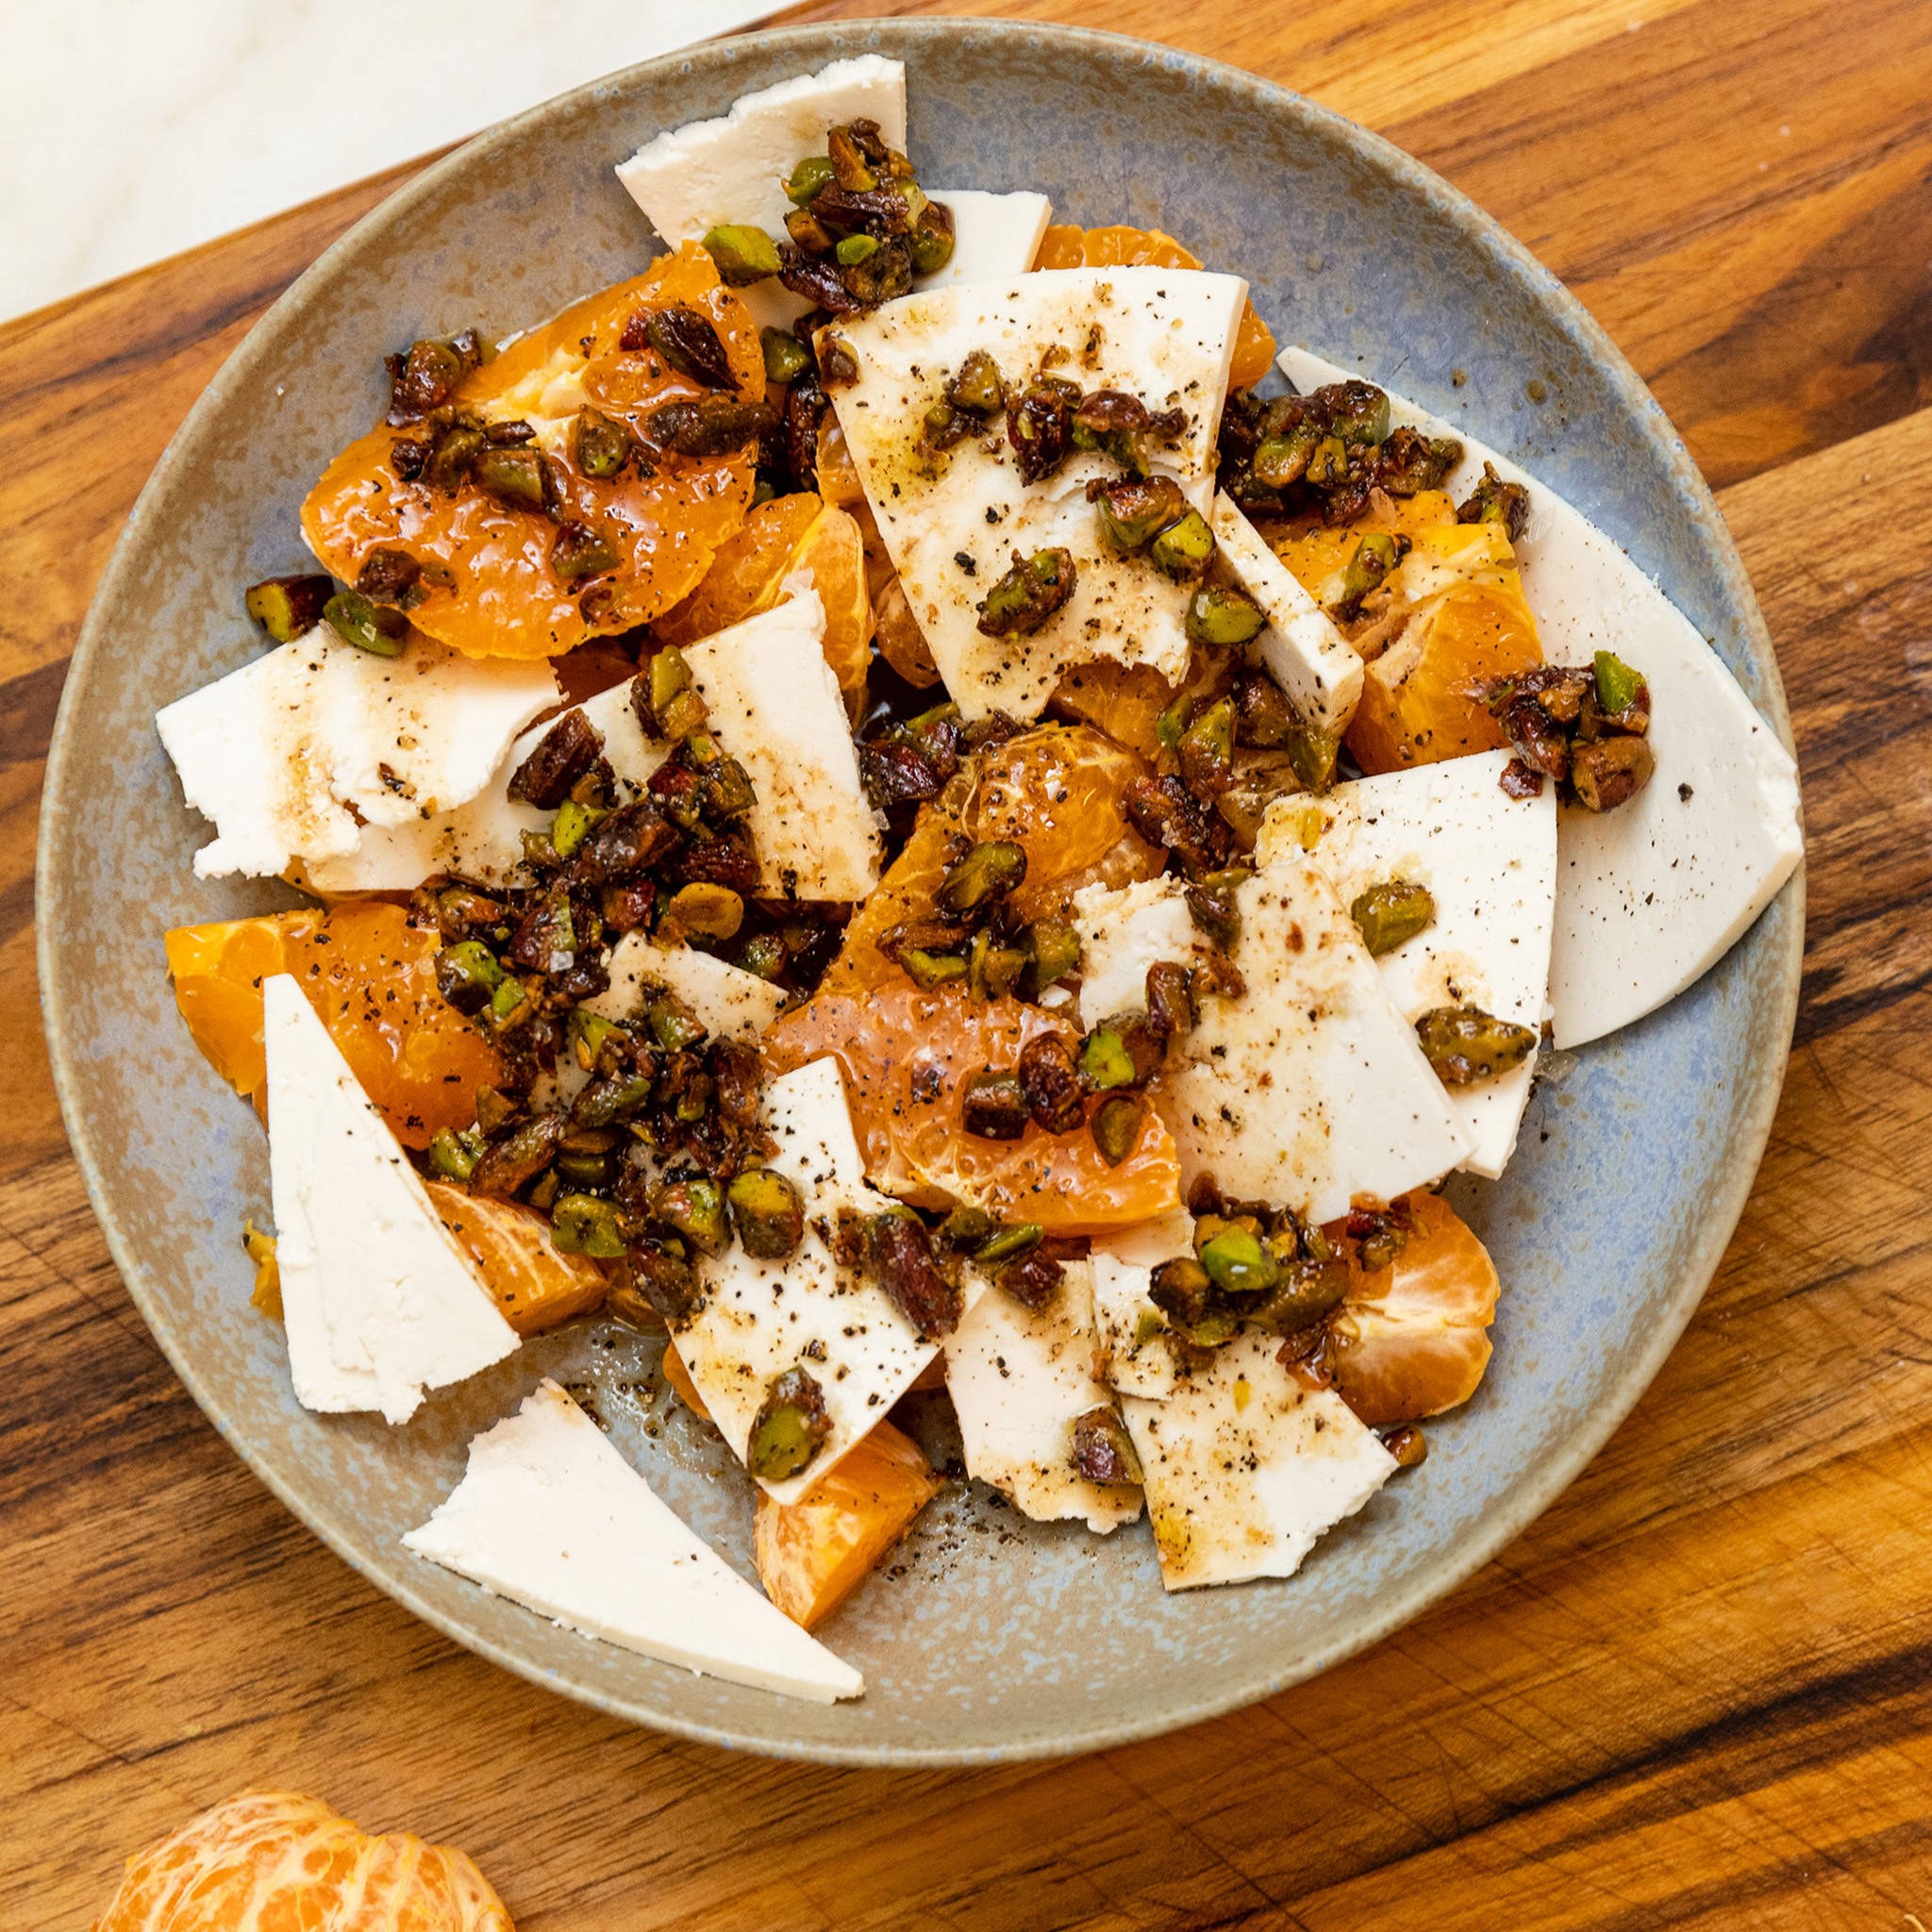 Carla Lalli Music's Clementines and Pistachios with Ricotta Salata